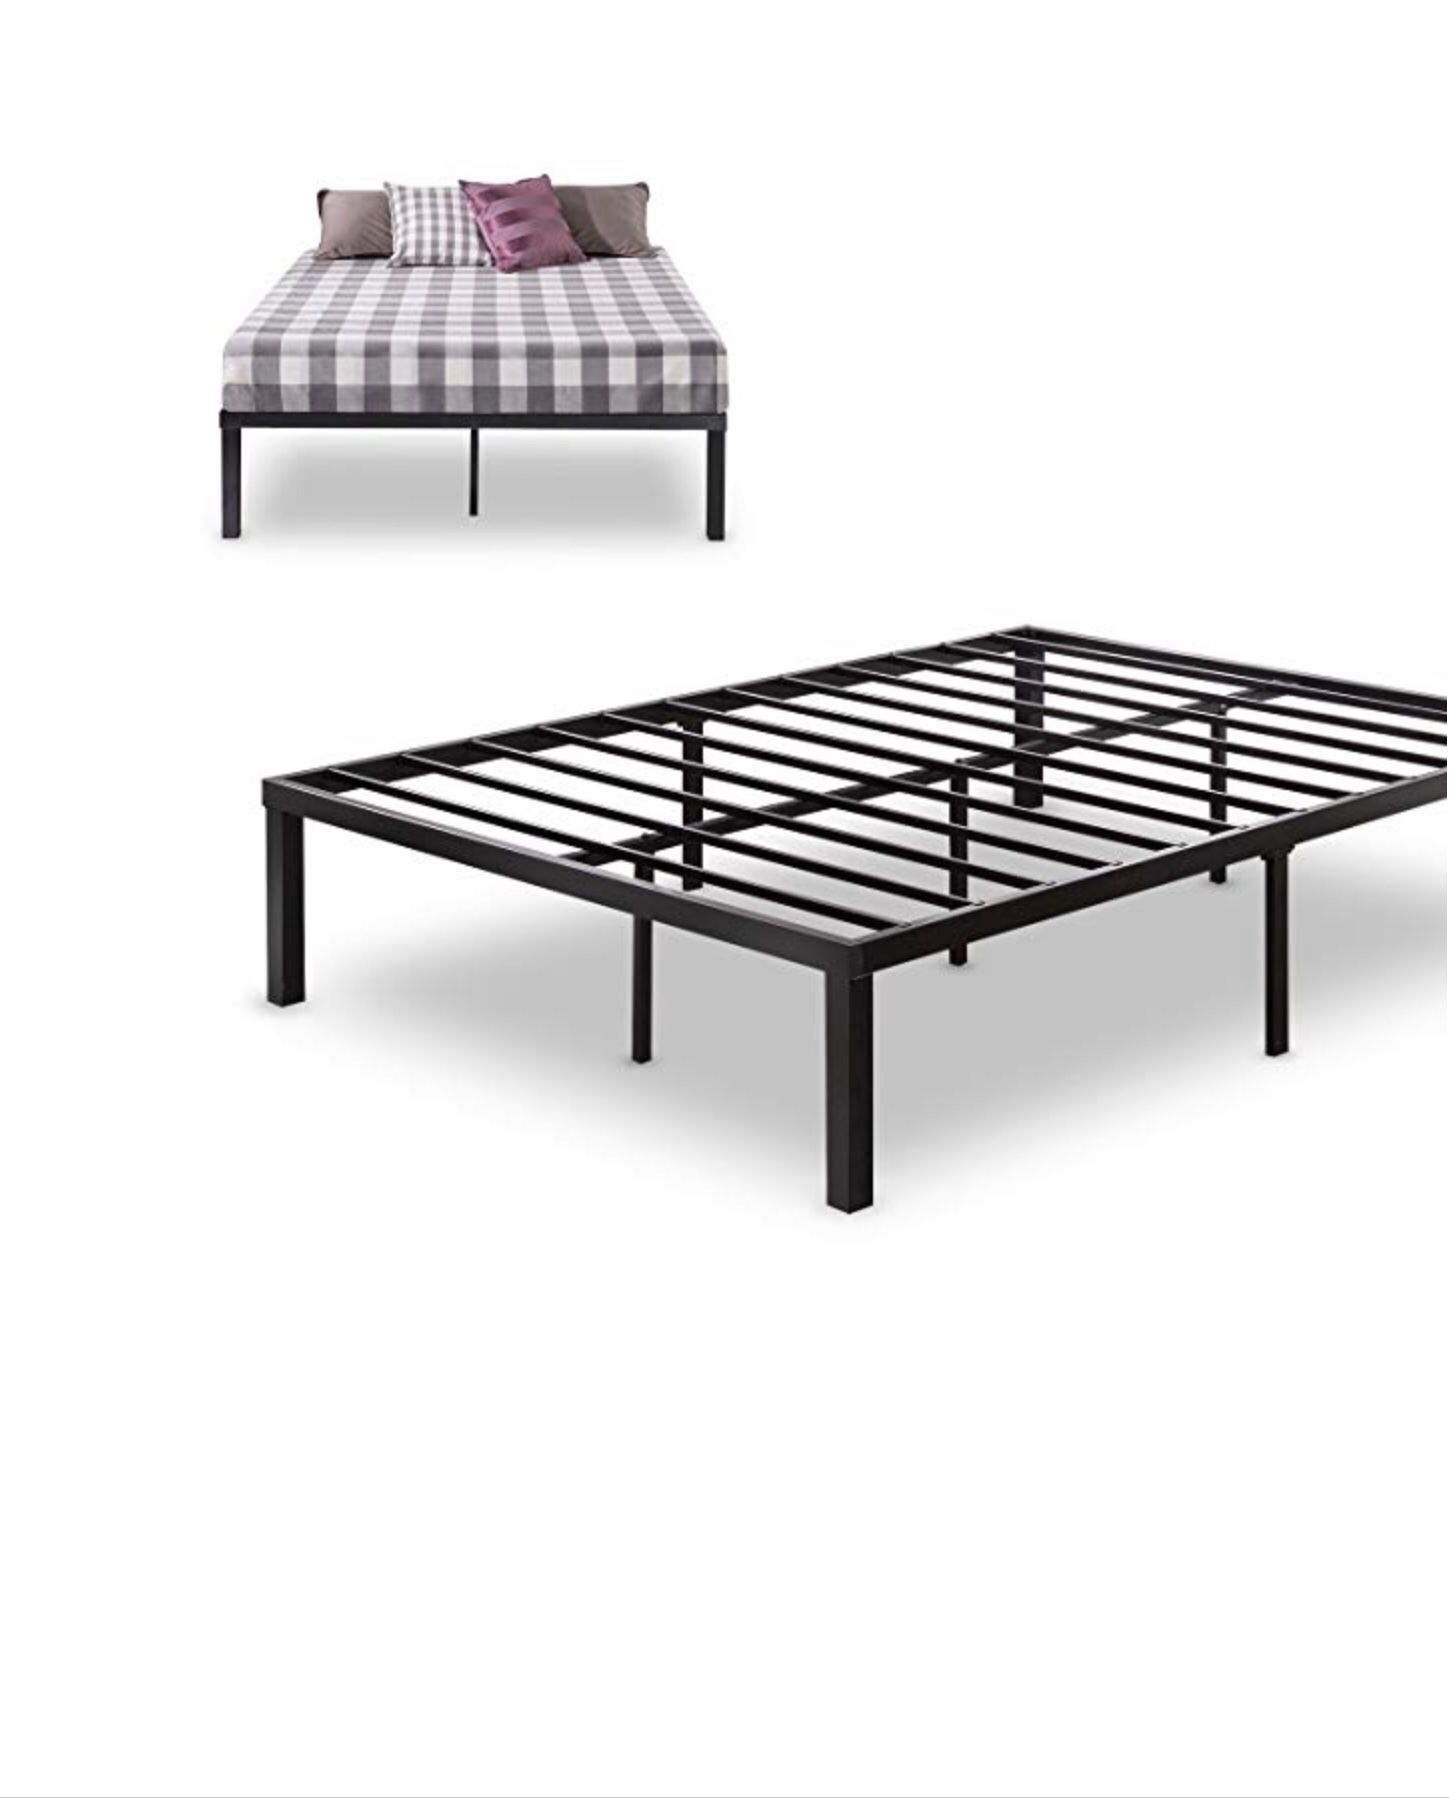 Queen size bed frame $60